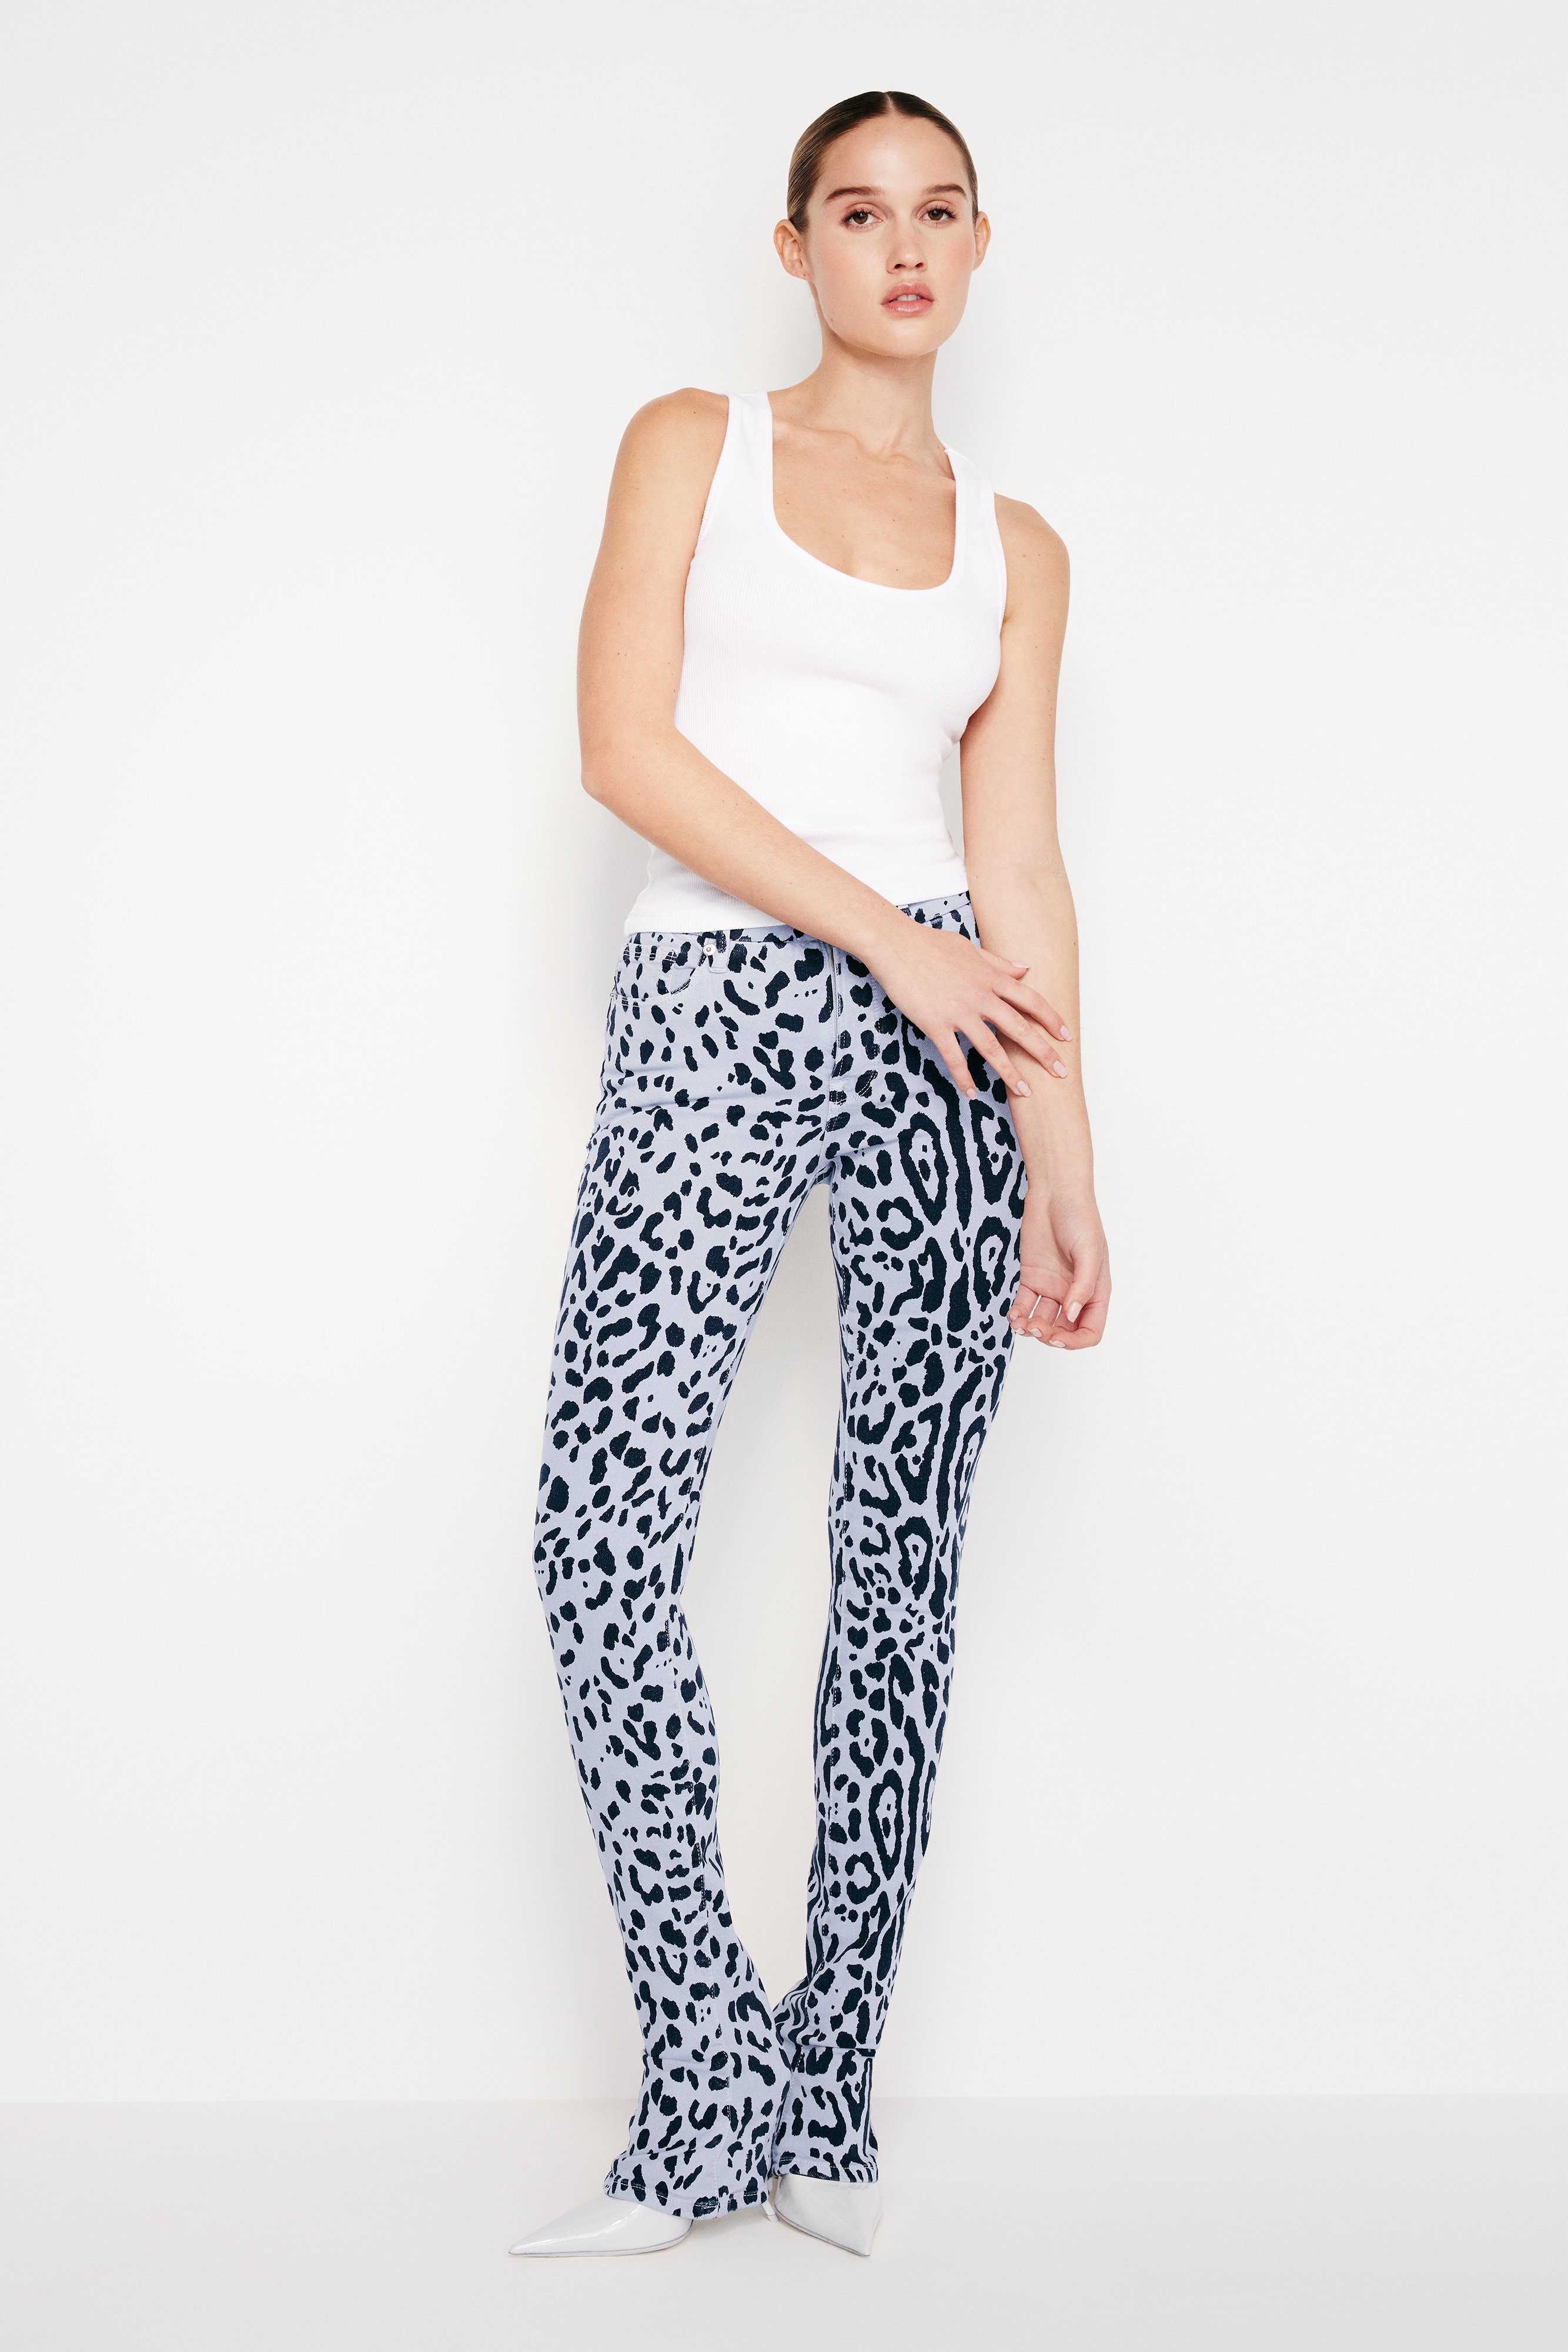 Styled with GOOD LEGS SLIM MICRO BOOTCUT JEANS | MINERAL GLASS LEOPARD001